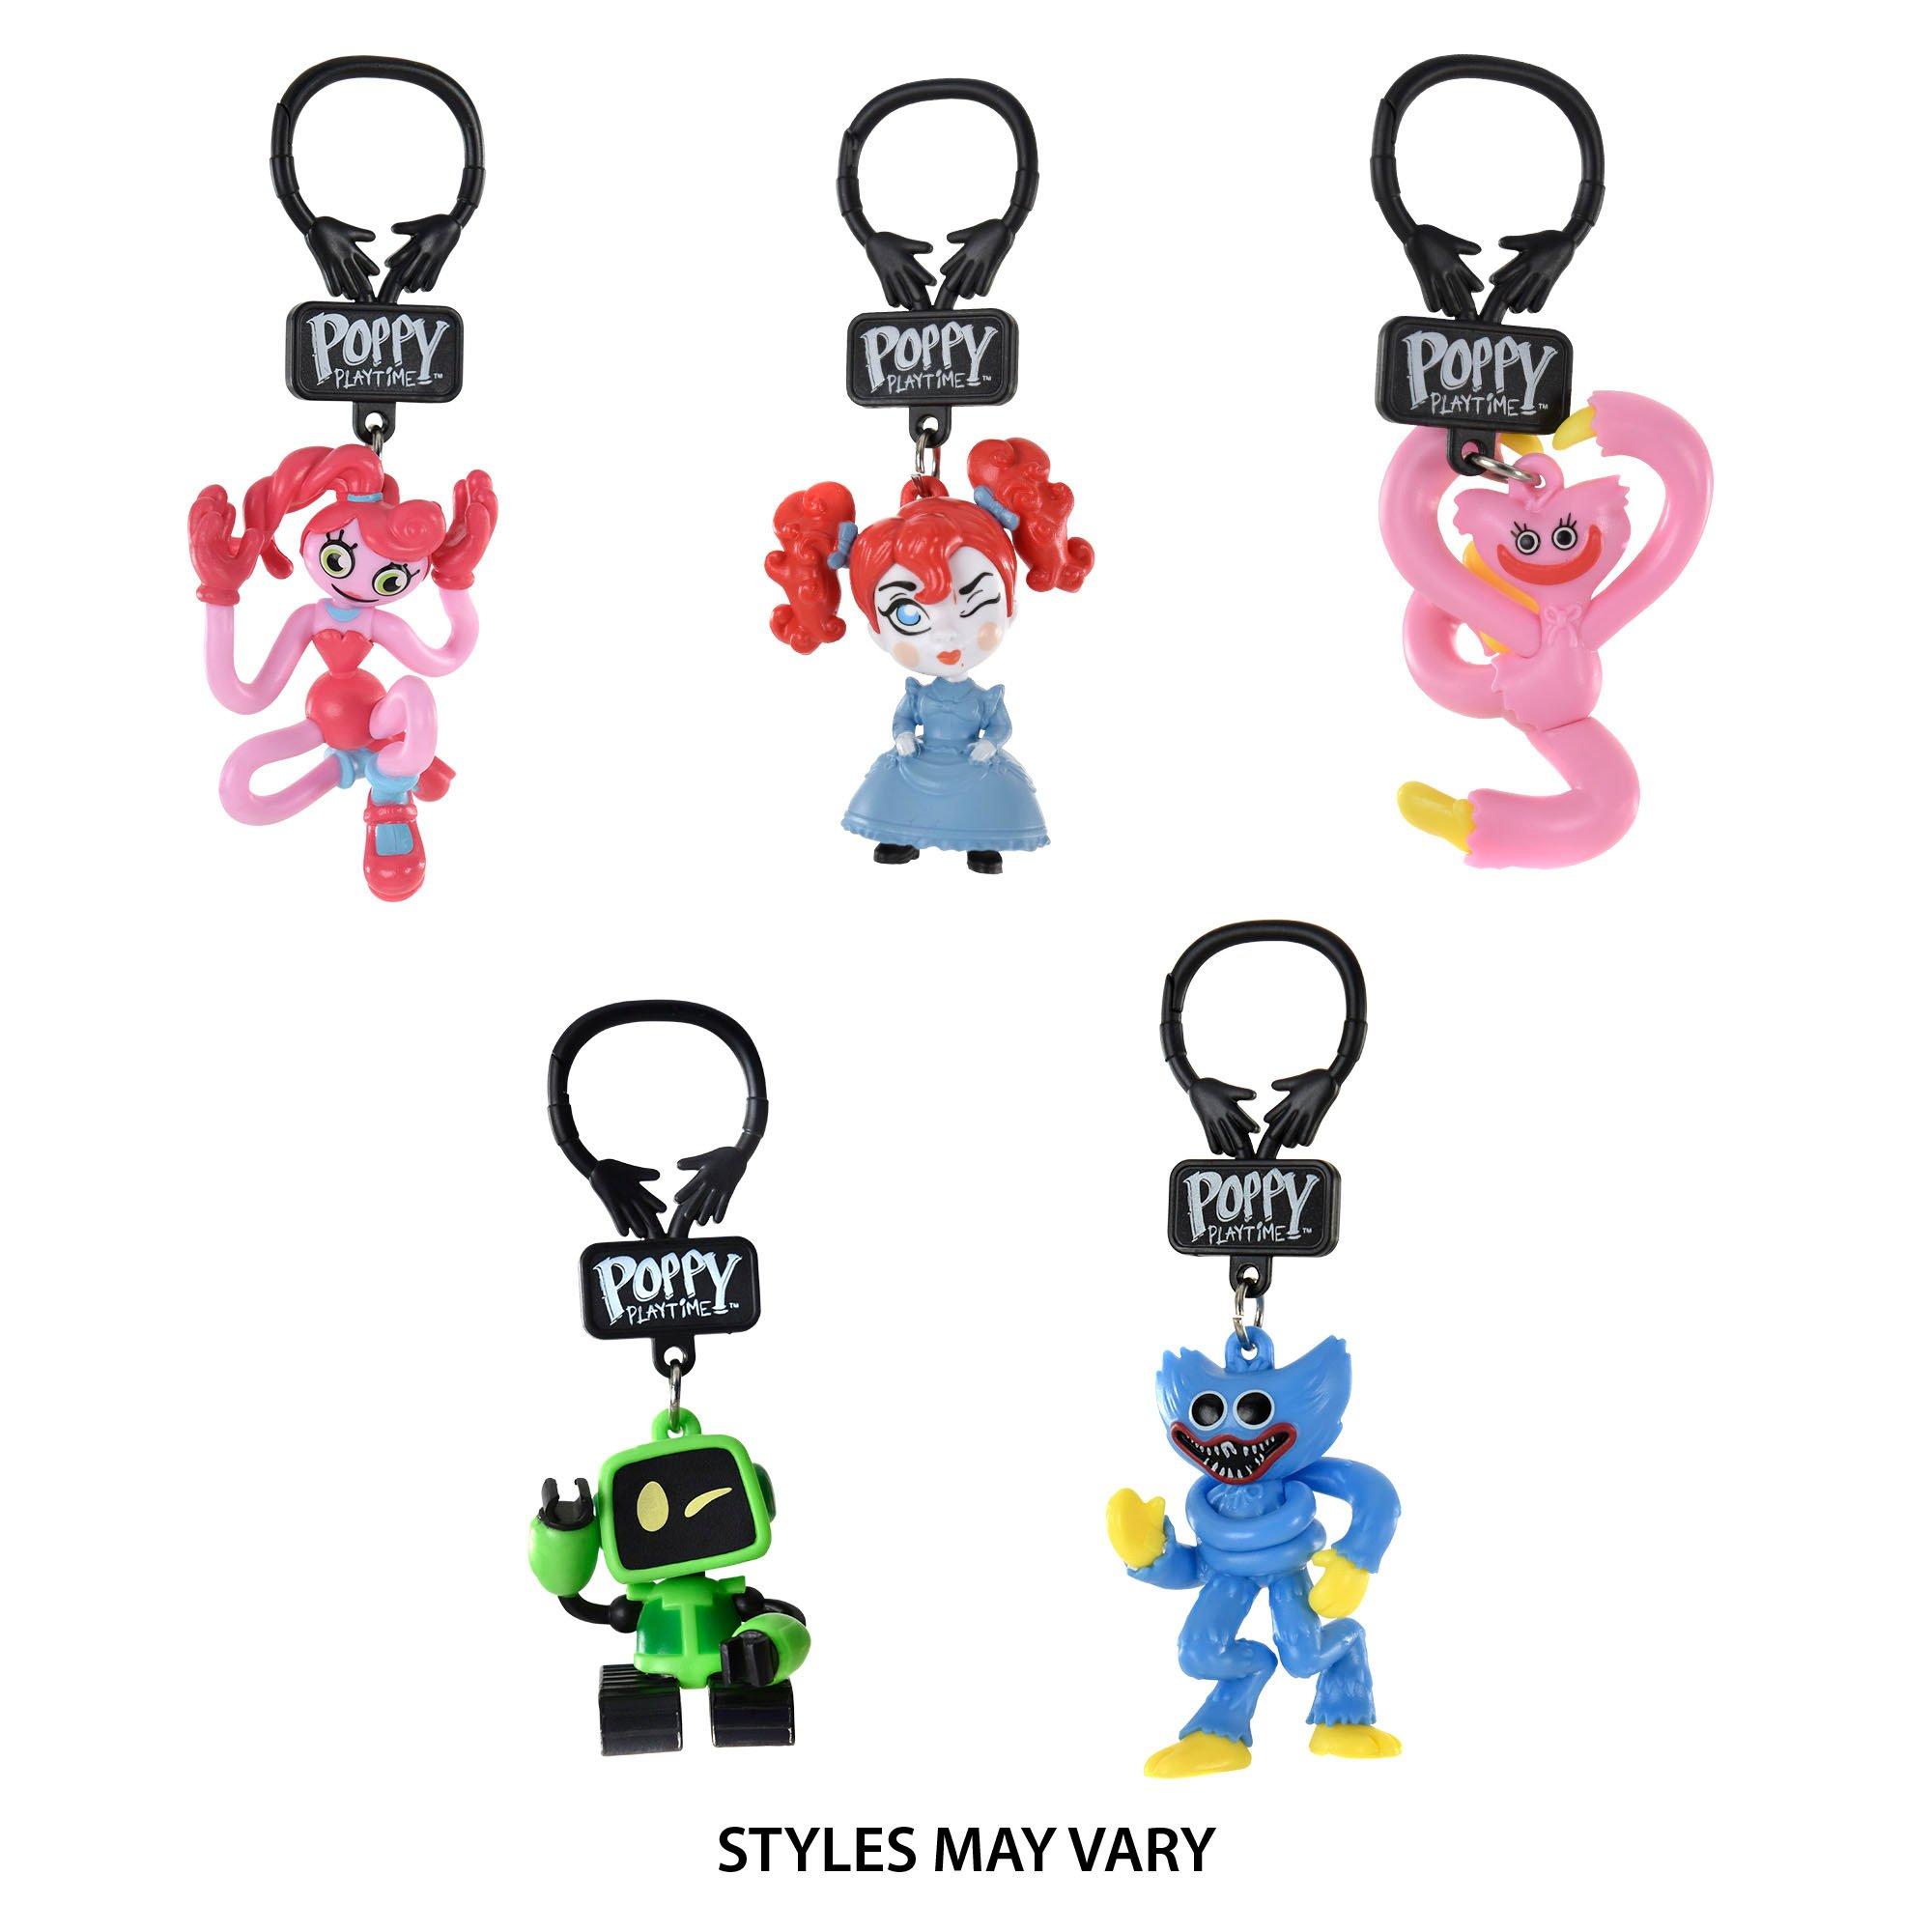 poppy playtime™ collector clips blind bag, Five Below